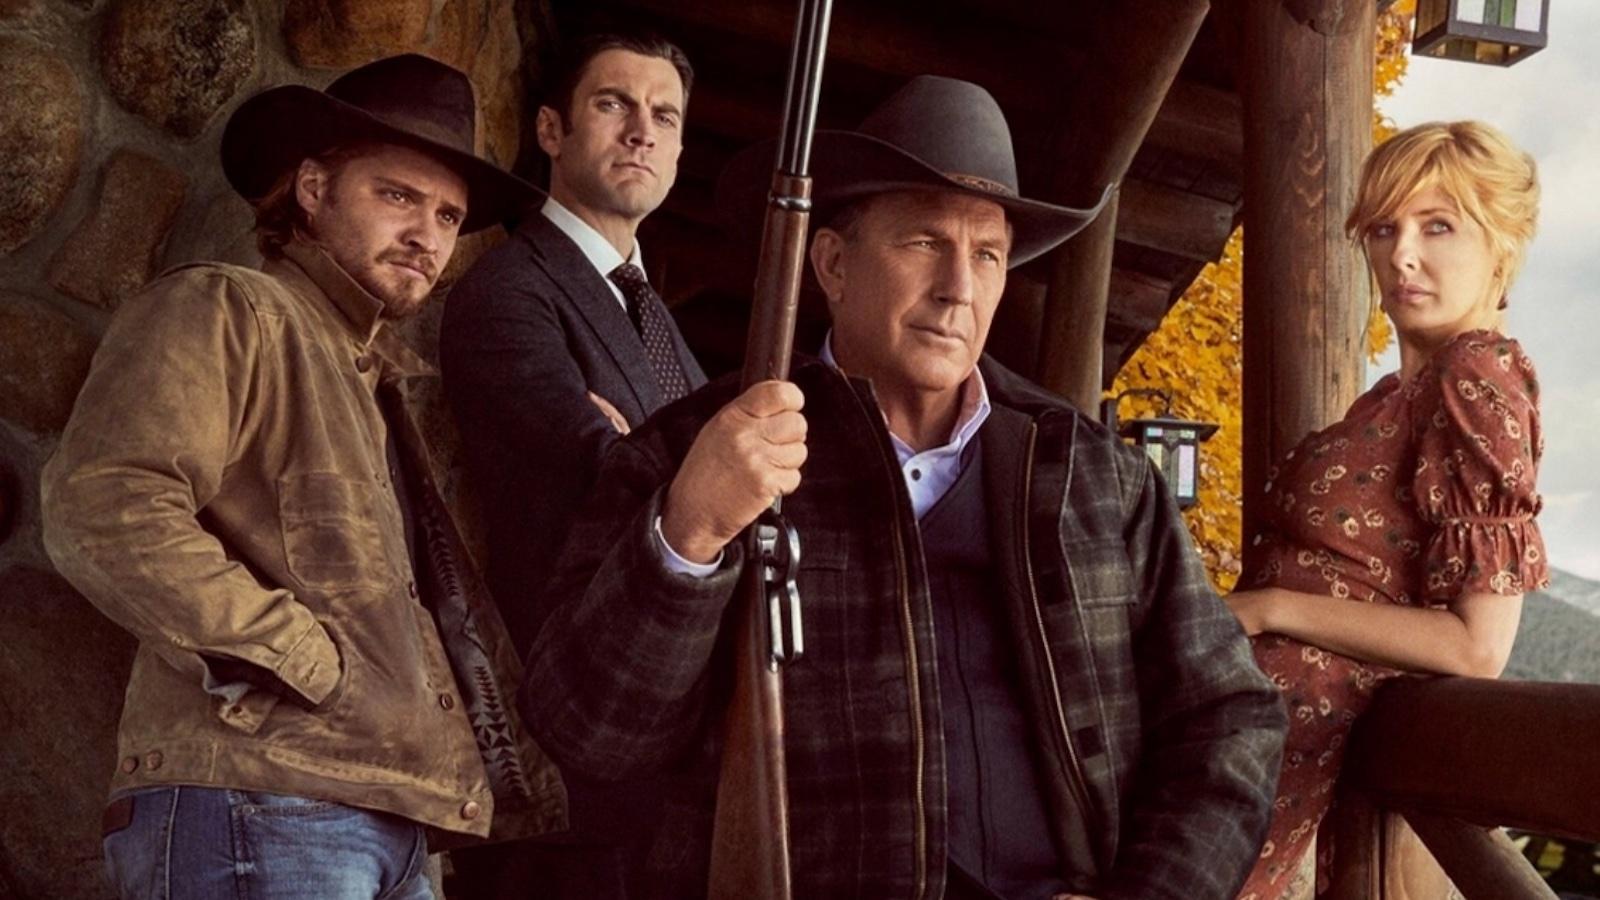 The cast of Yellowstone